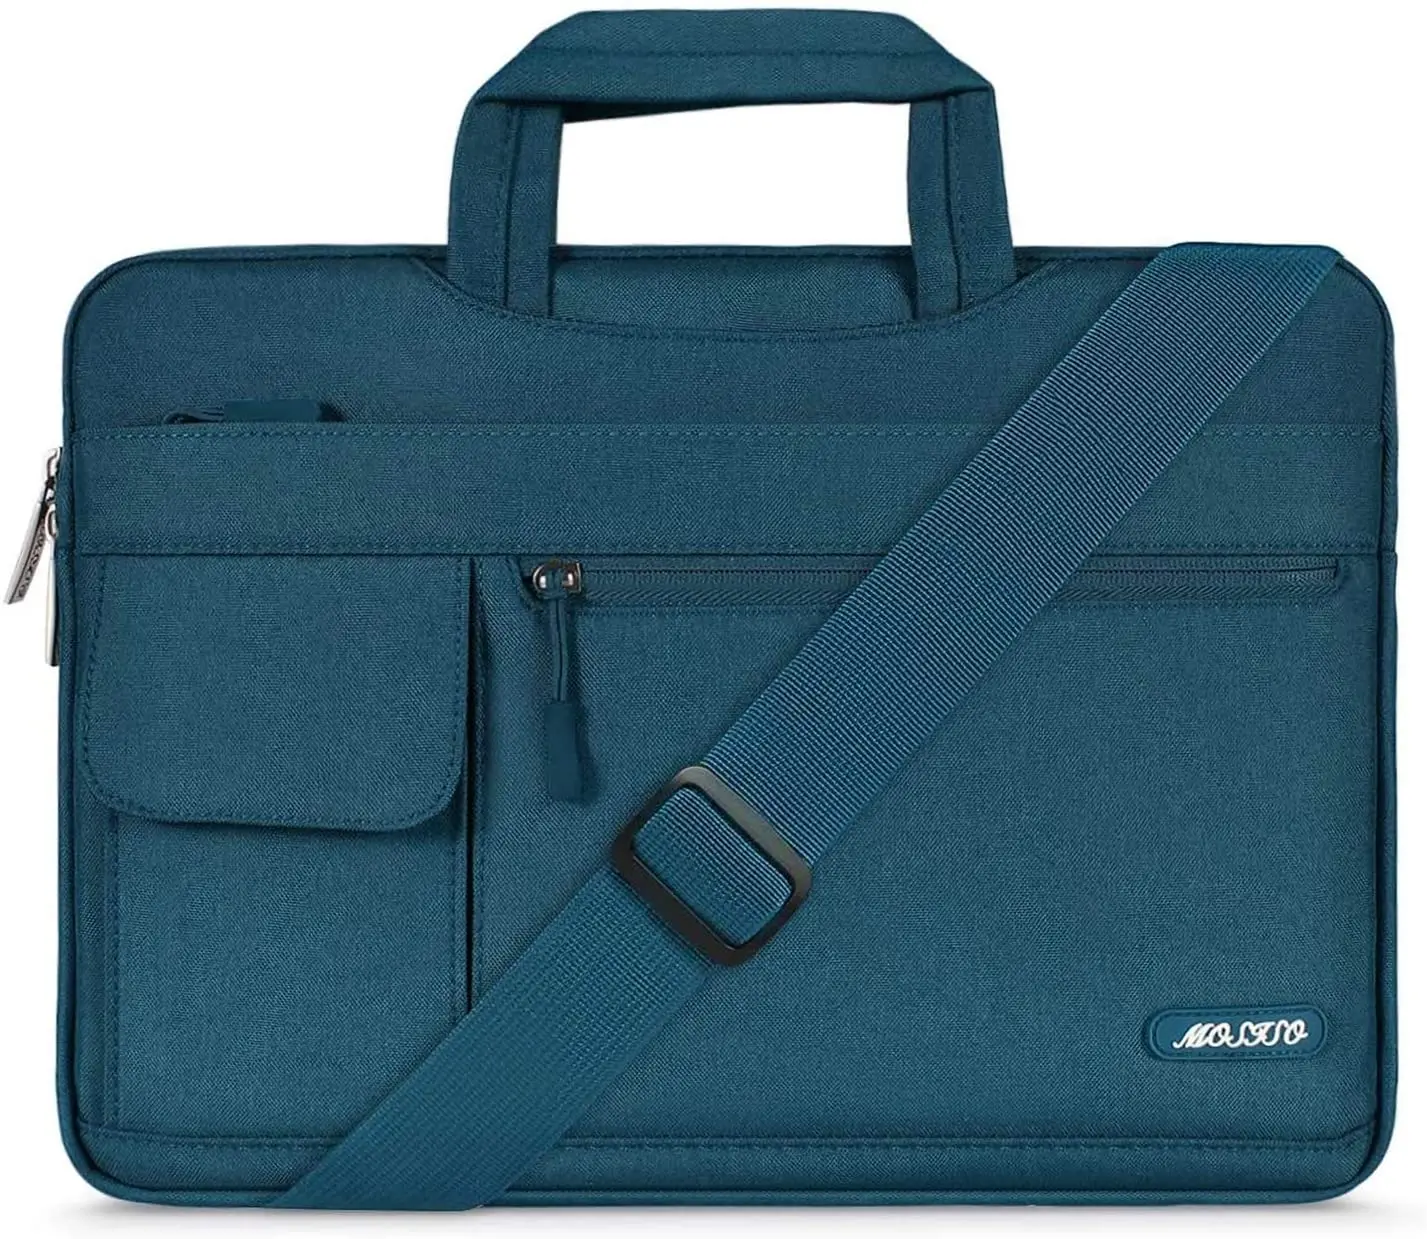 Hot Blue MOSISO Laptop Shoulder Bag Compatible with 13-13.3 inch MacBook Pro Polyester Messenger Carrying Briefcase Sleeve with Adjustable Depth at Bottom MacBook Air Notebook Computer 